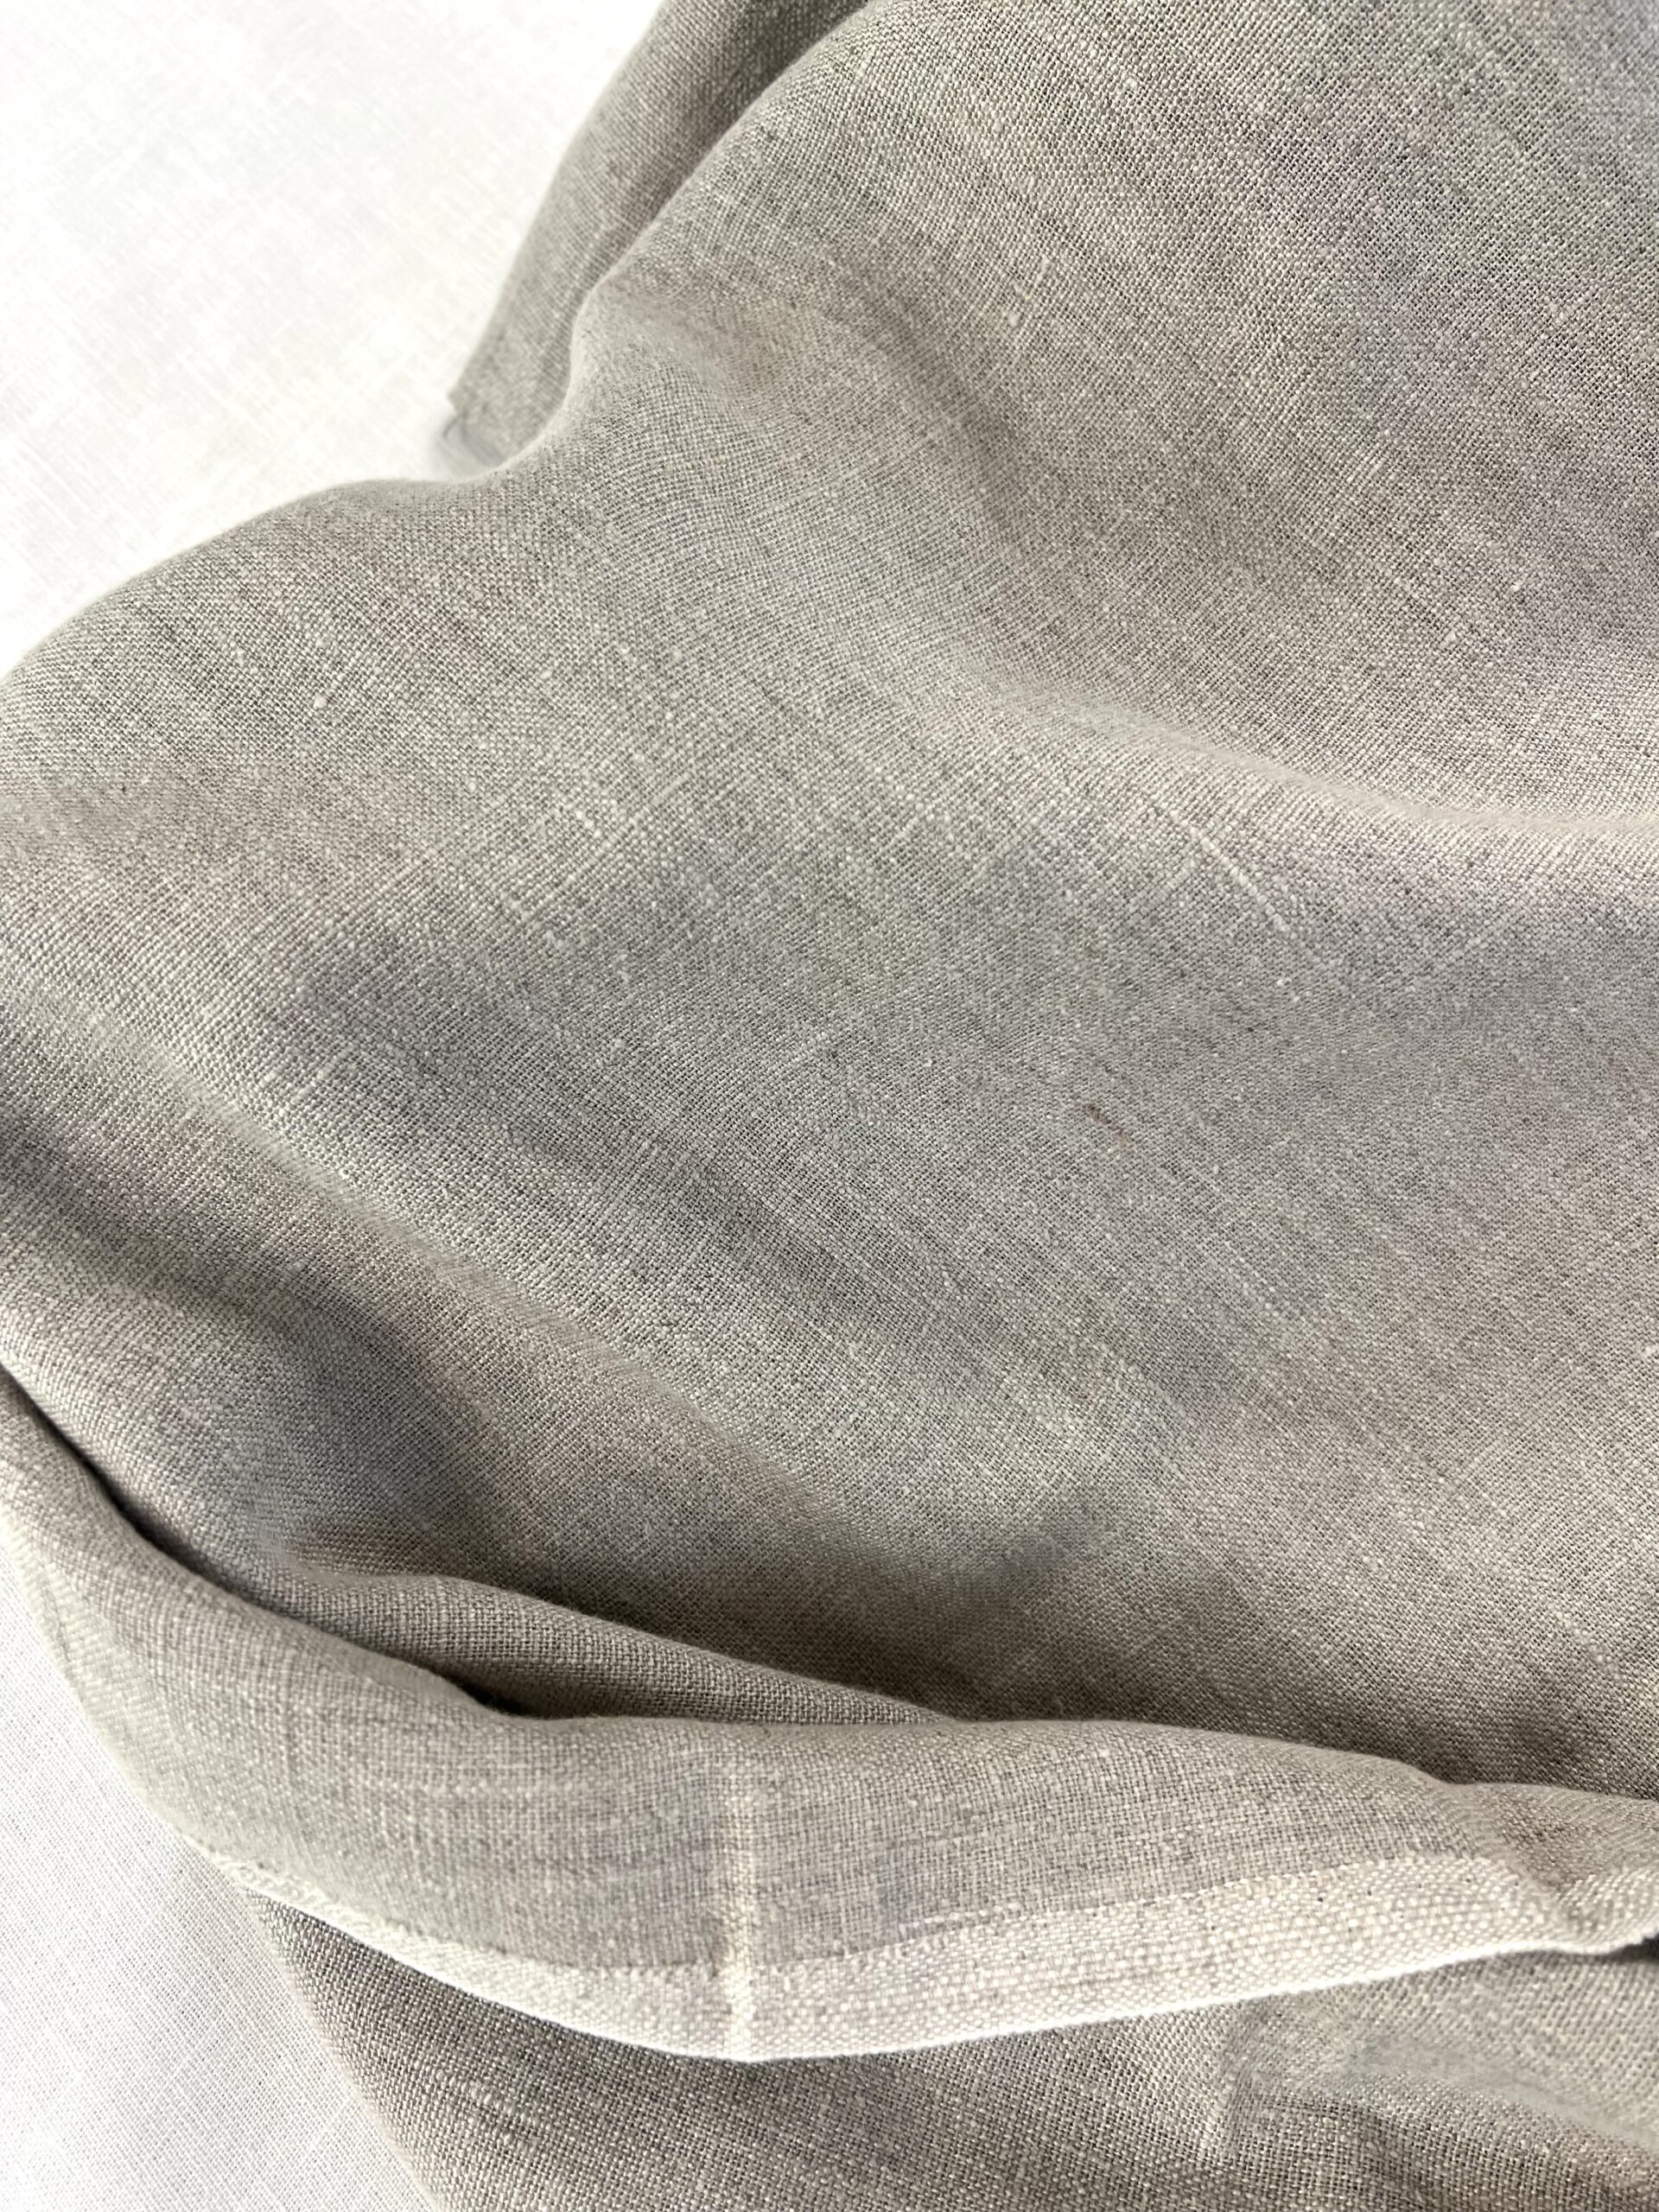 Natural 260gsm European Laundered Linen - Joan’s Fine Fabric